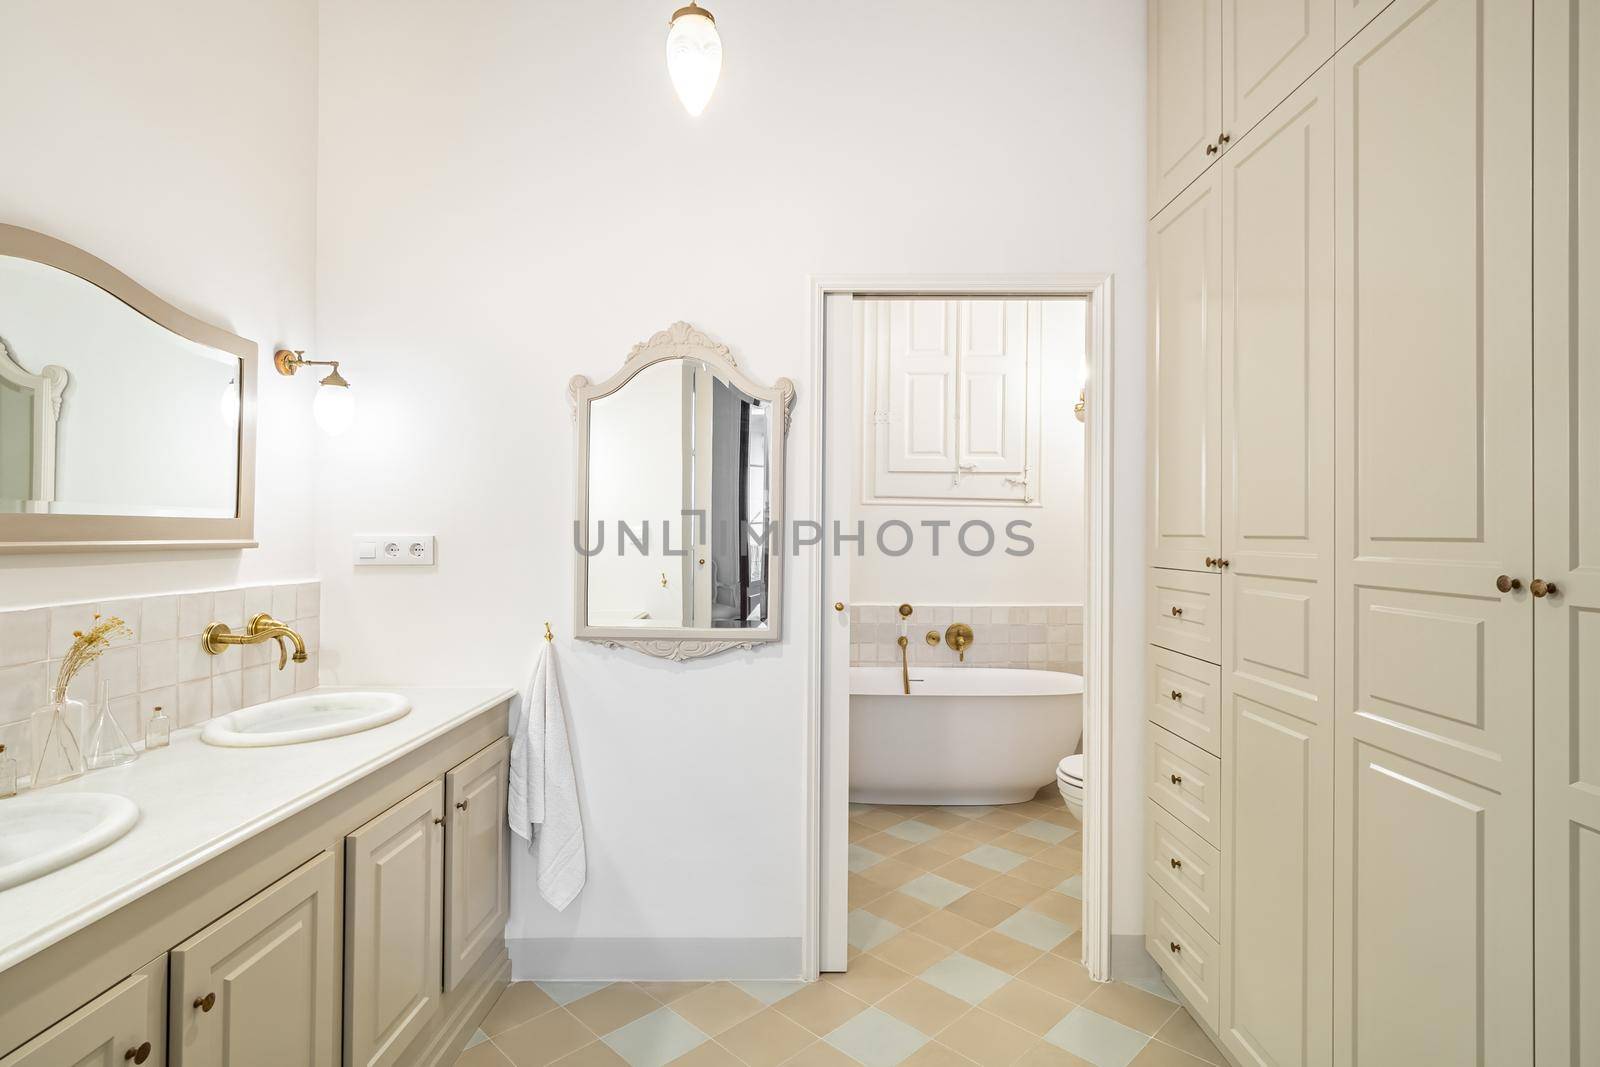 Interior of retro or classic style bathroom decorated in beige color with bath zone, big wardrobe, two sinks and vintage mirrors. by apavlin